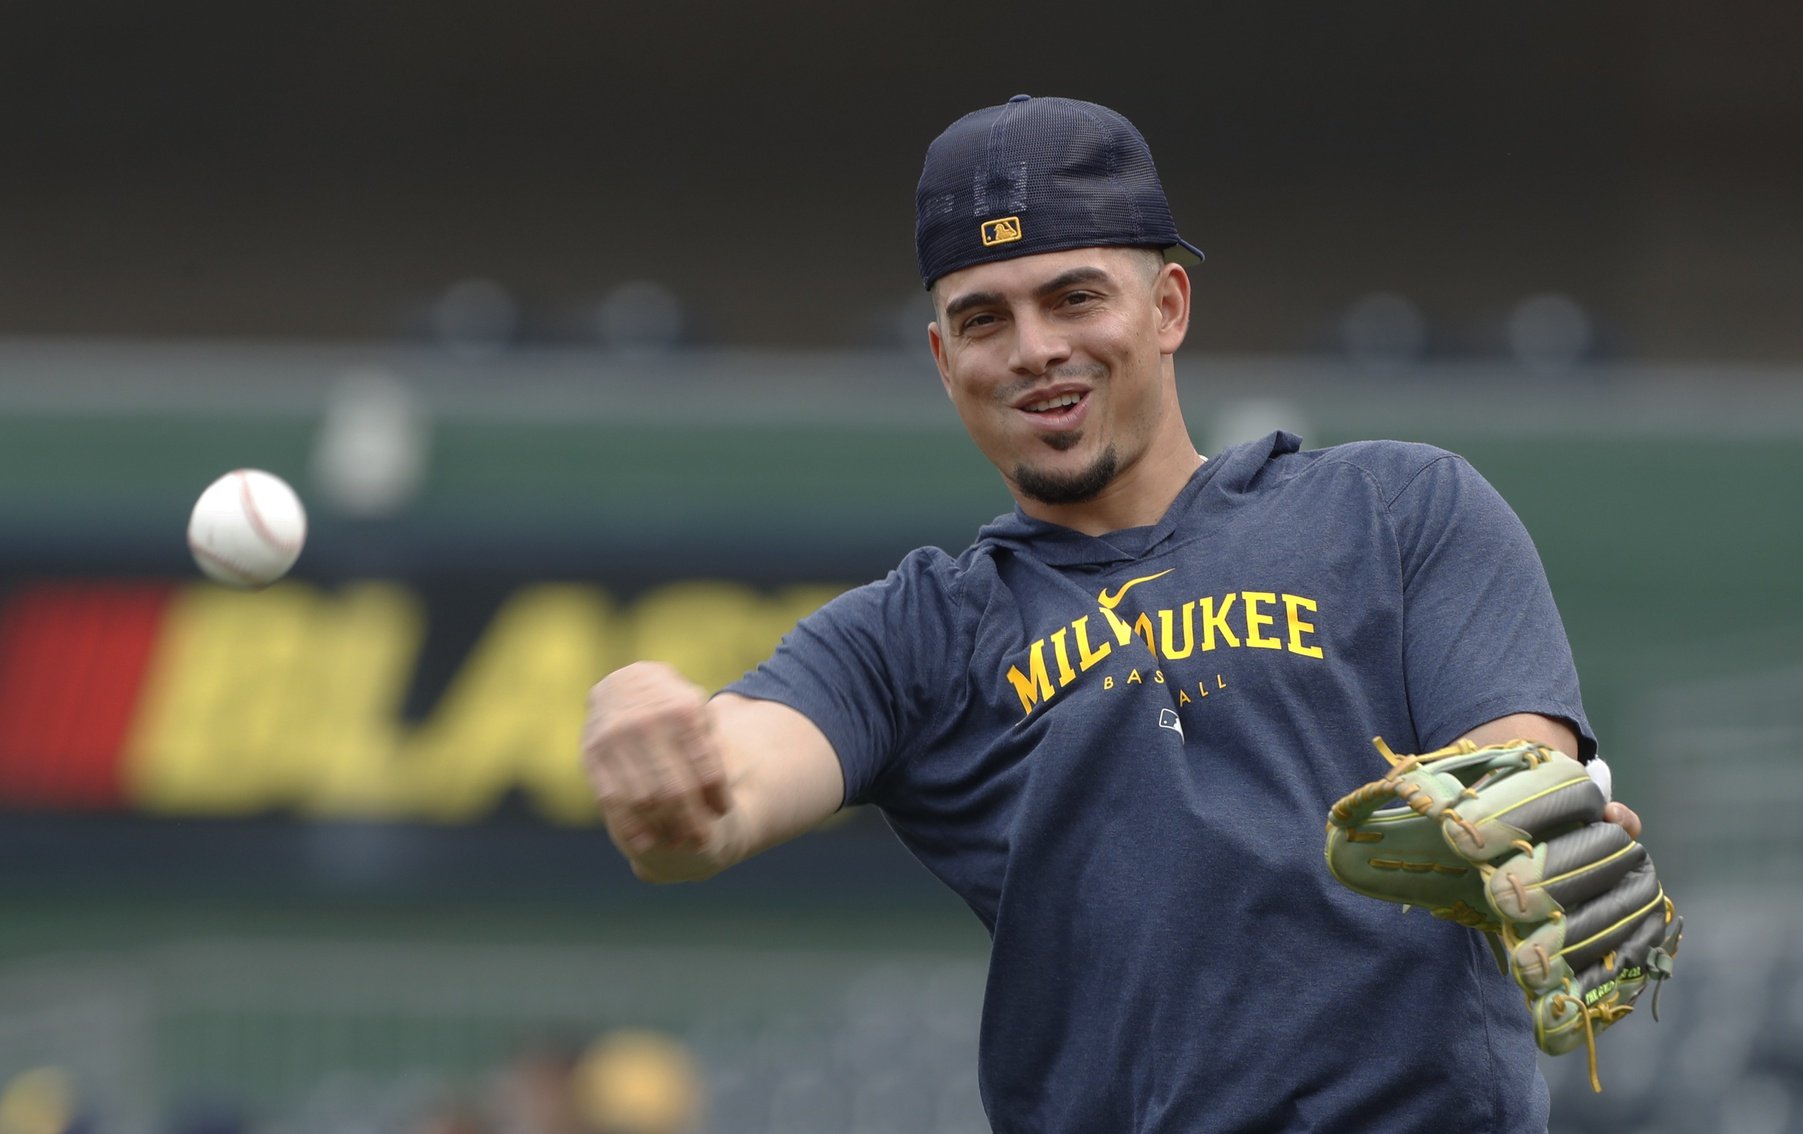 Adames hopes to remain with Brewers long term: 'I love playing